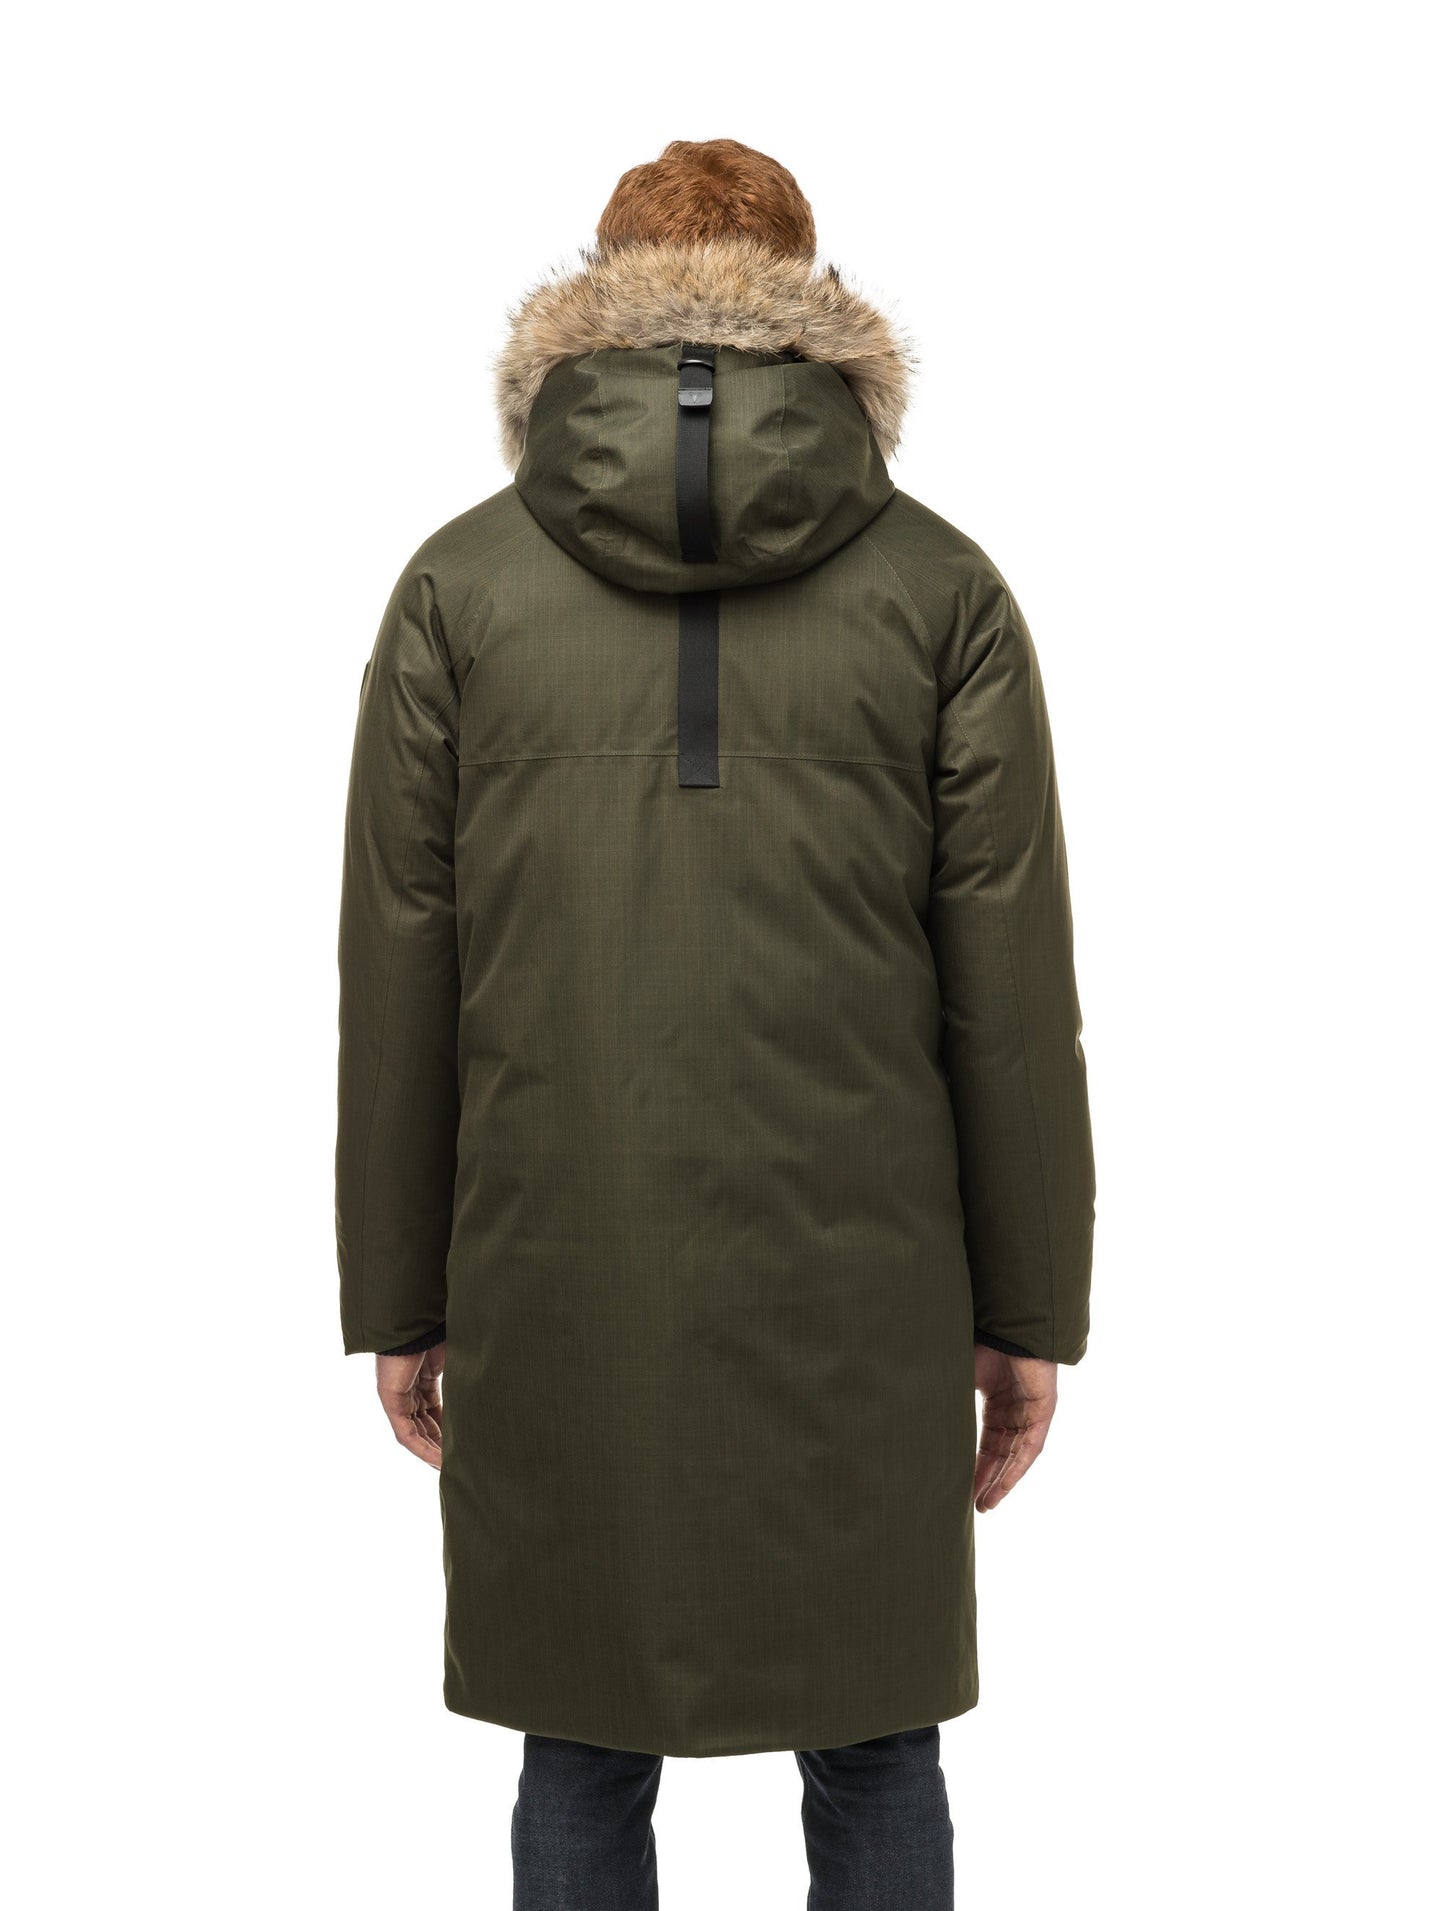 This ankle length men's down filled parka doubles as an over coat with a removable fur trim on the hood in Fatigue